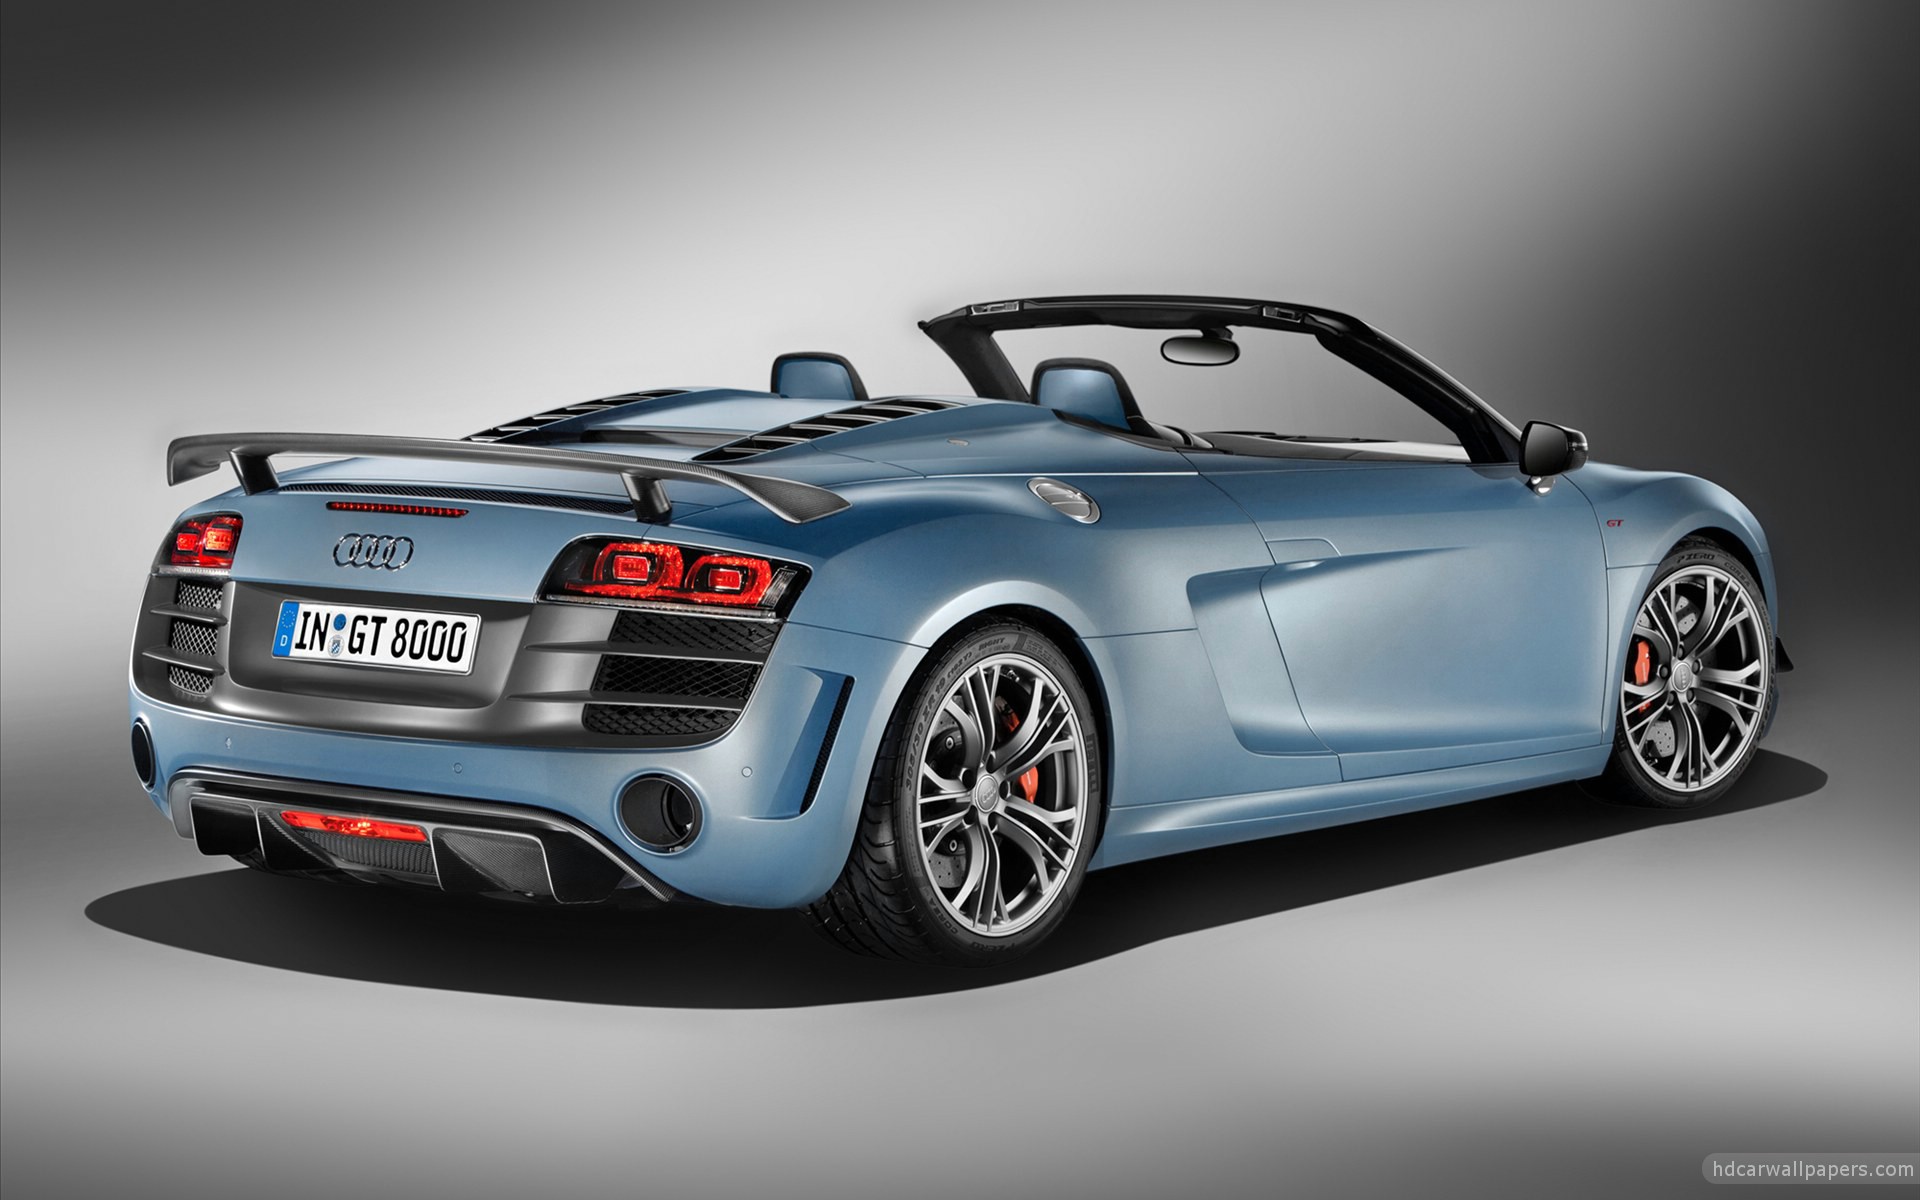 The Ultimate Open Air Supercar: The 2012 Audi R8 GT Spyder